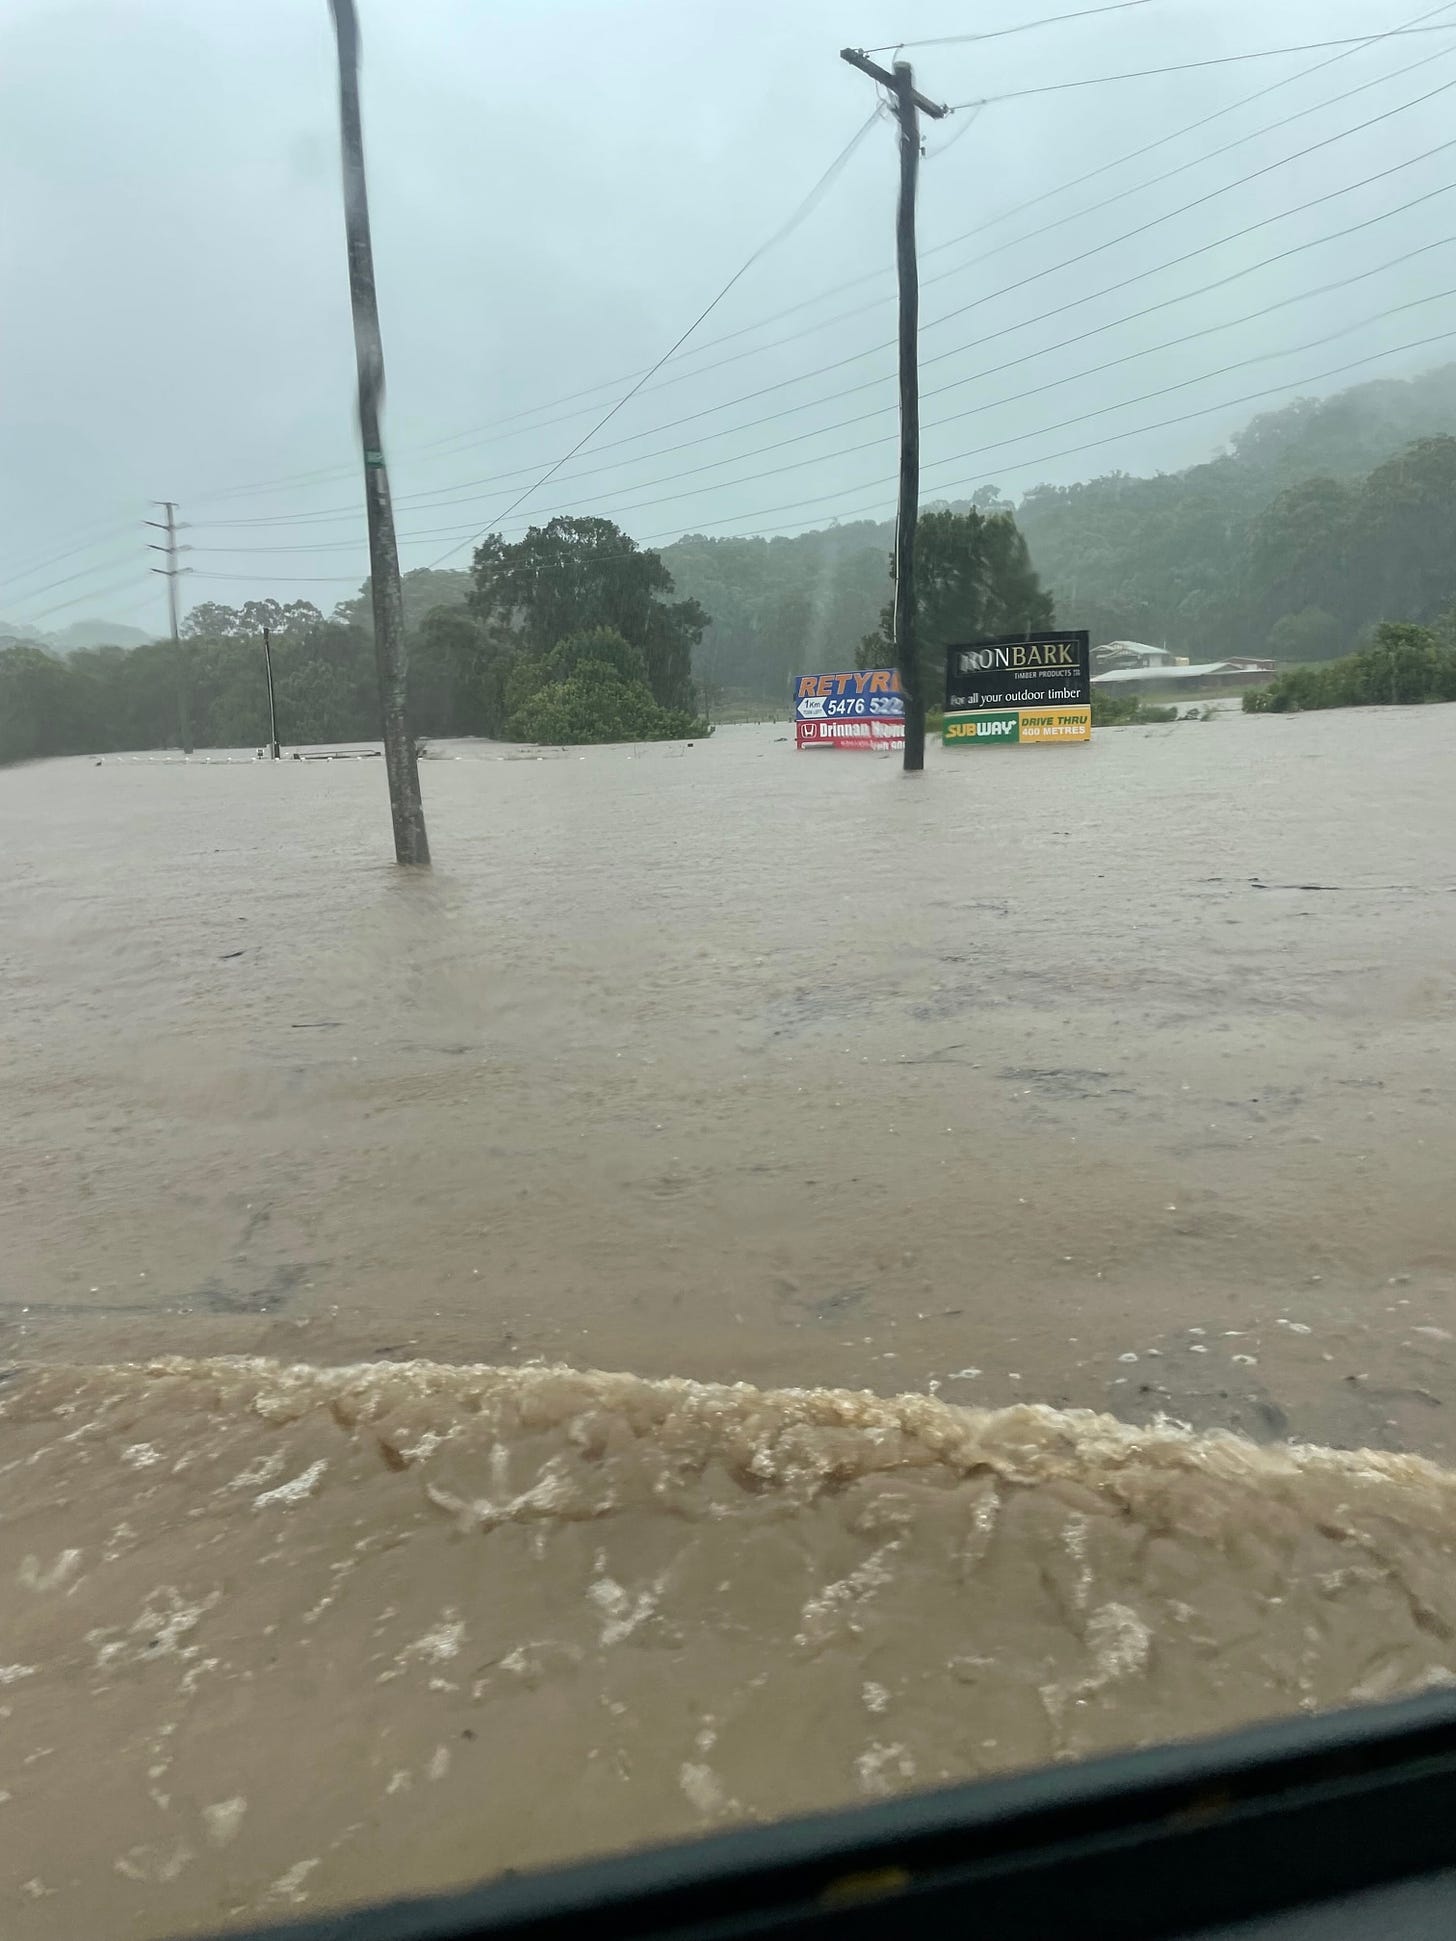 A photo of flood waters on the Sunshine Coast. The water goes up to the billboards on the side of the road